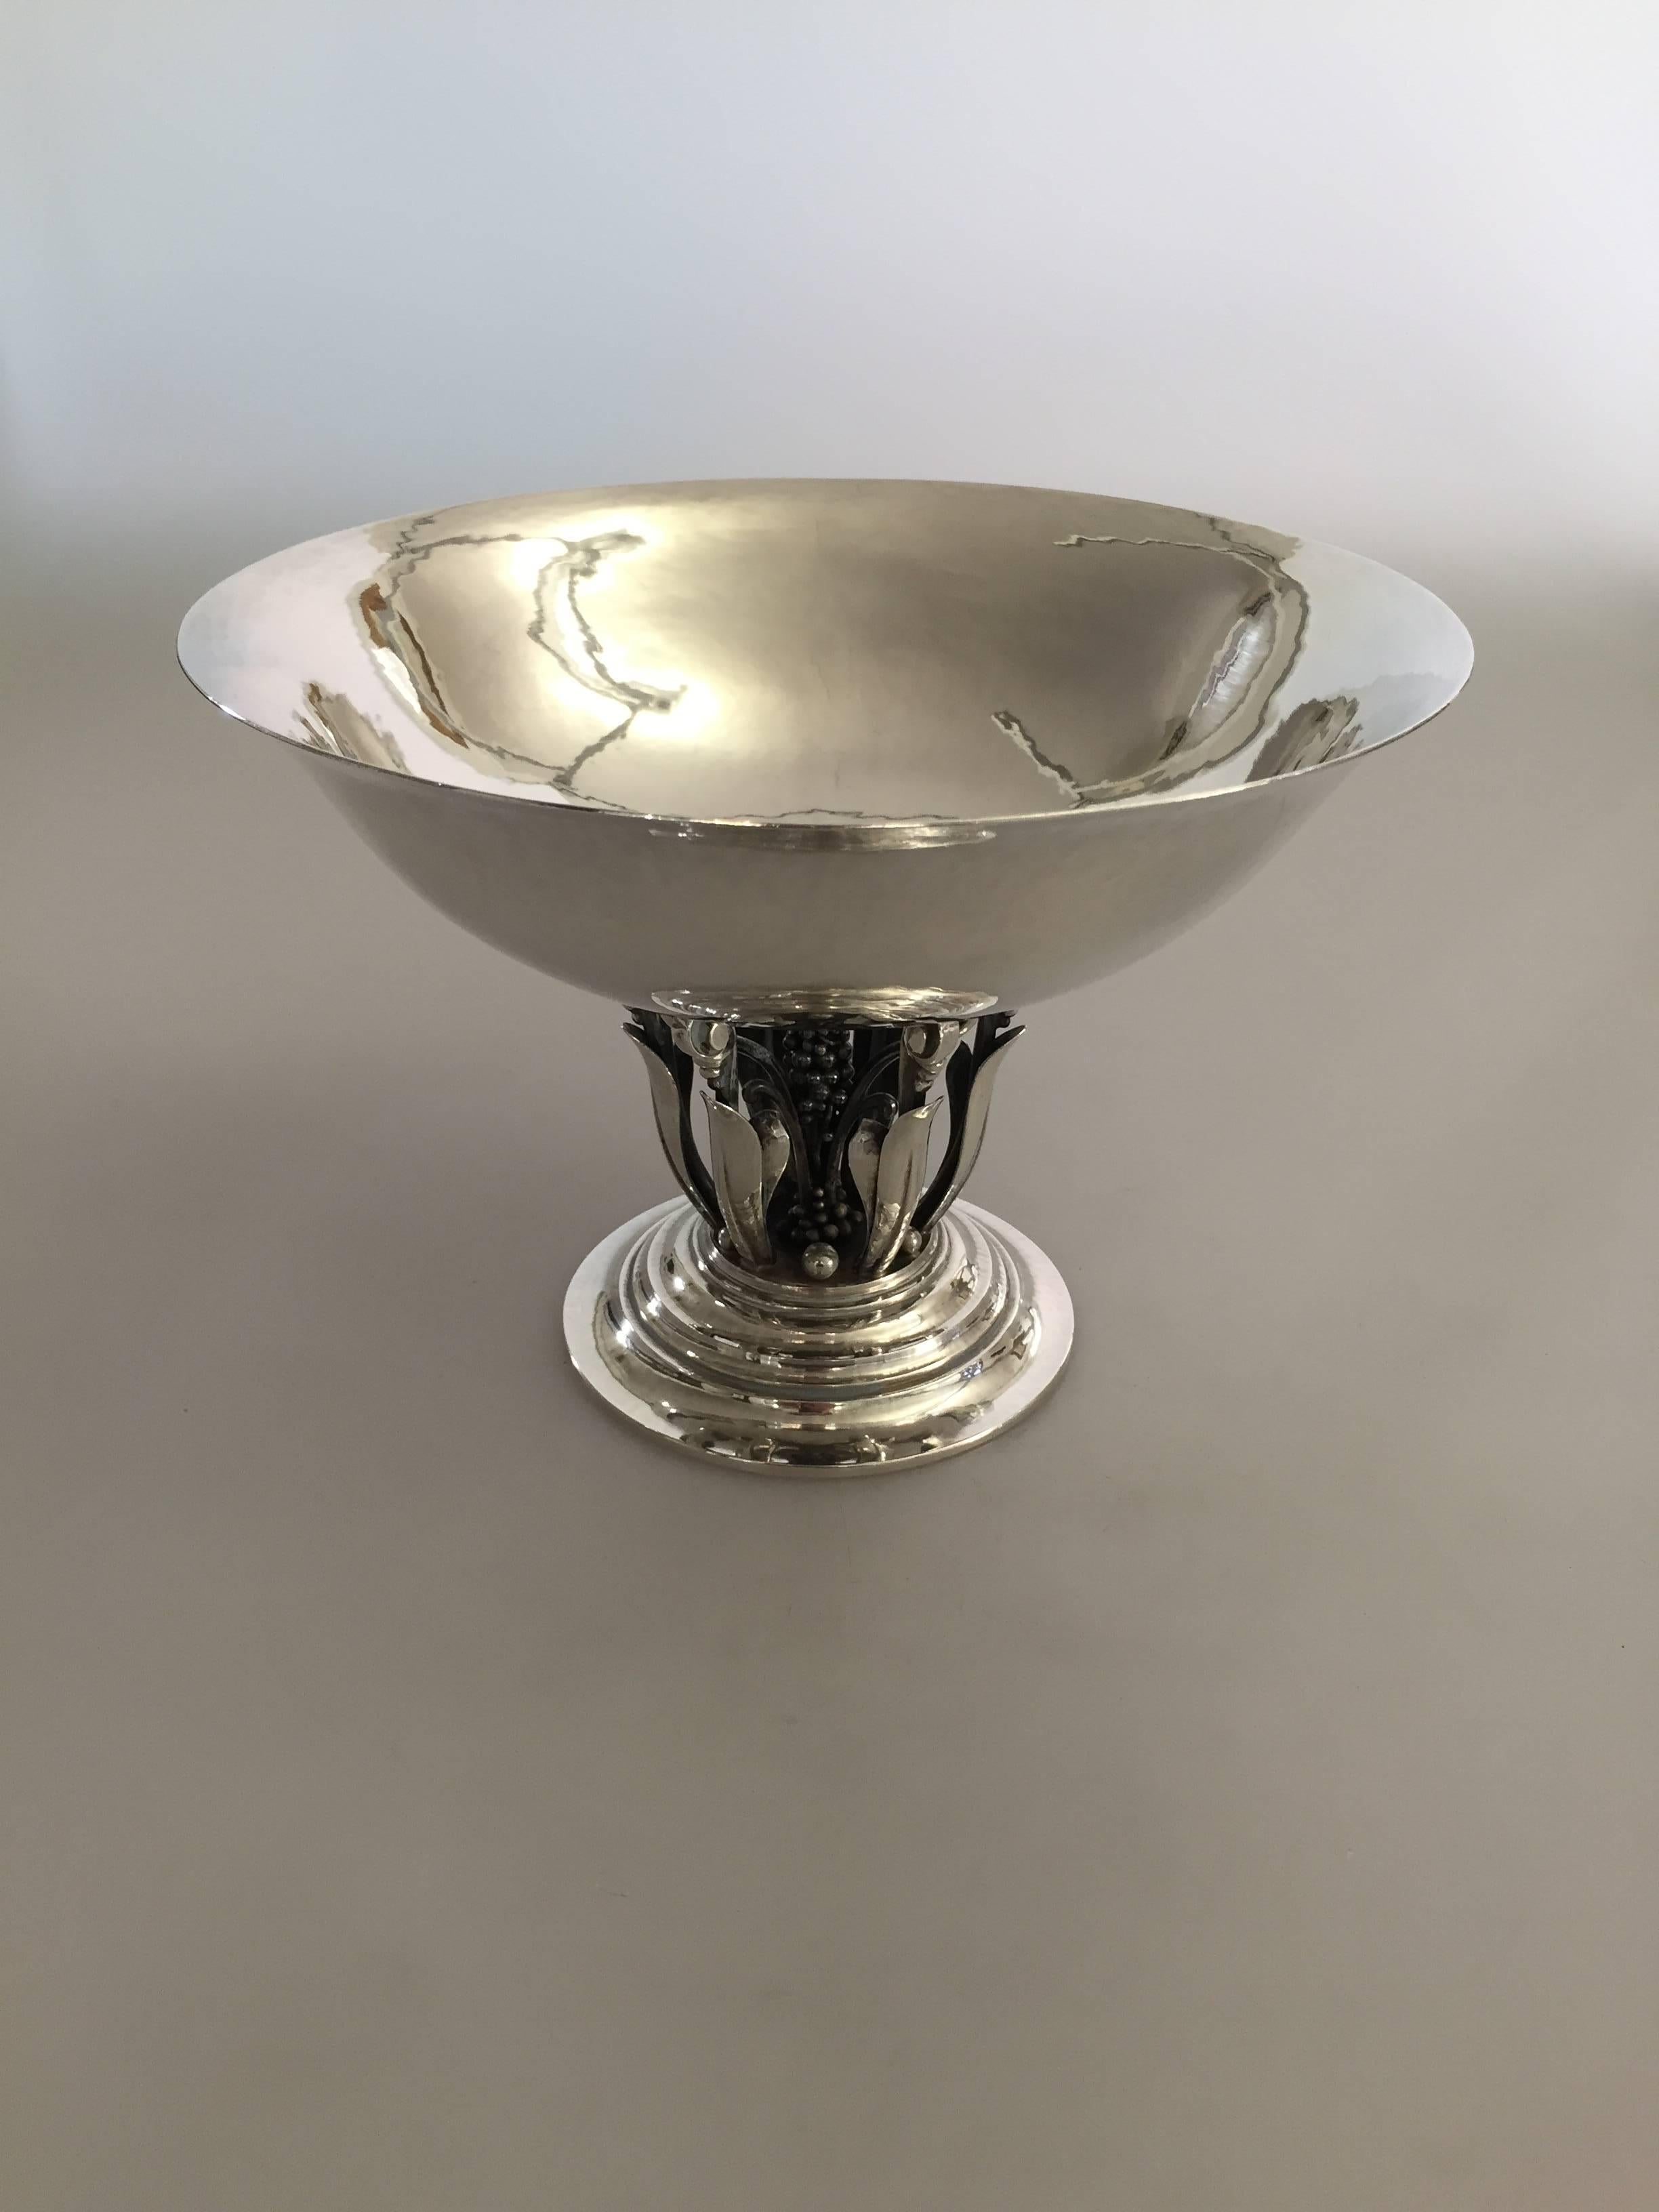 Danish Georg Jensen Sterling Silver Footed Bowl #171